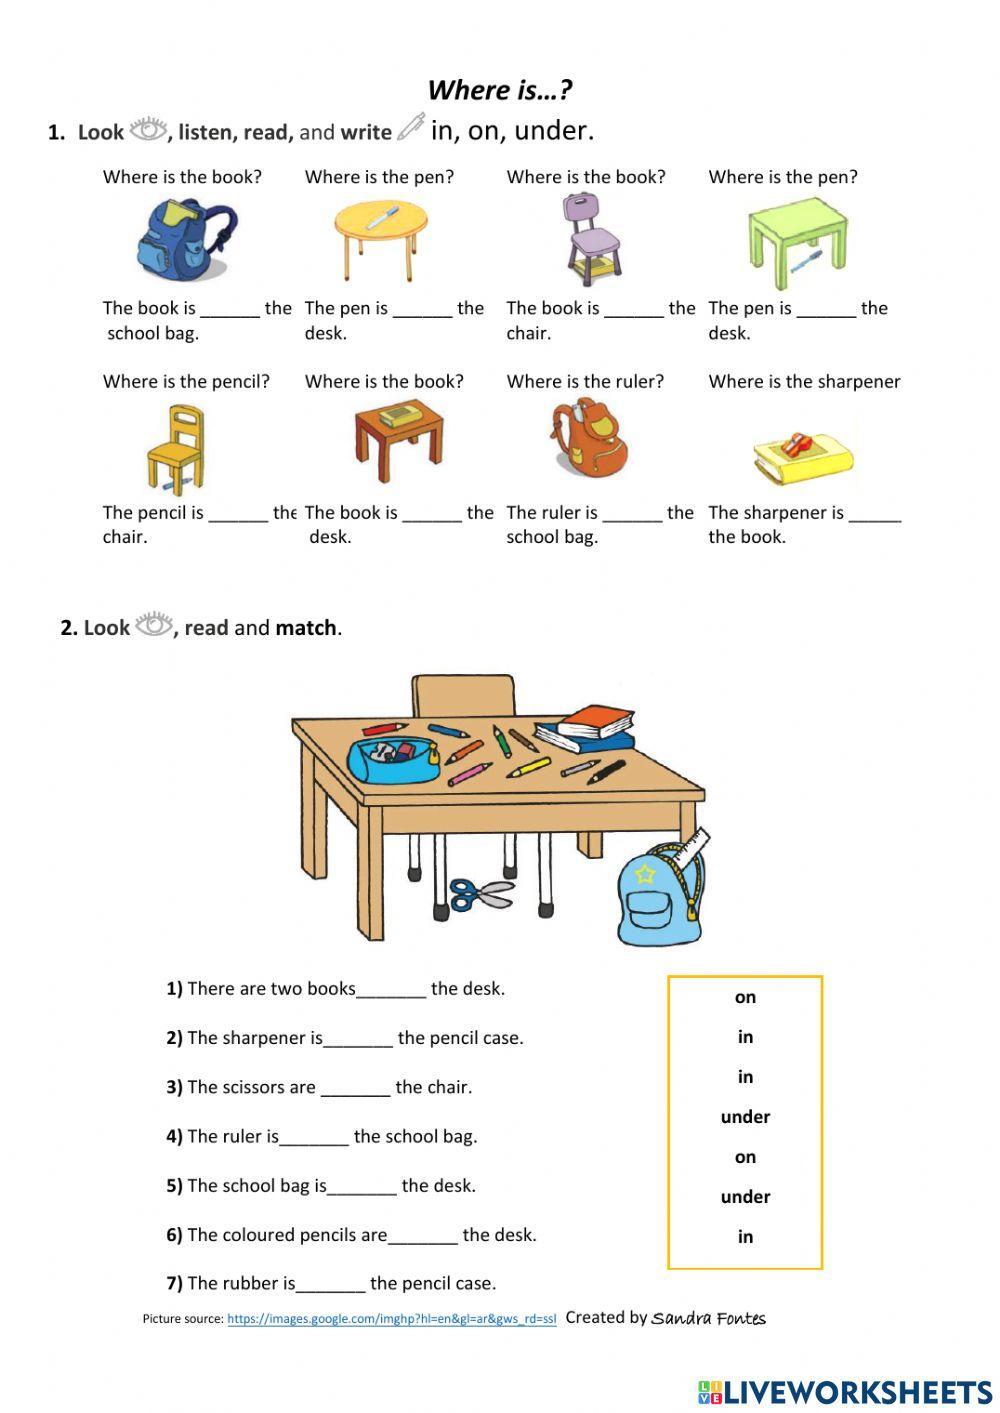 School Objects and Place Prepositions